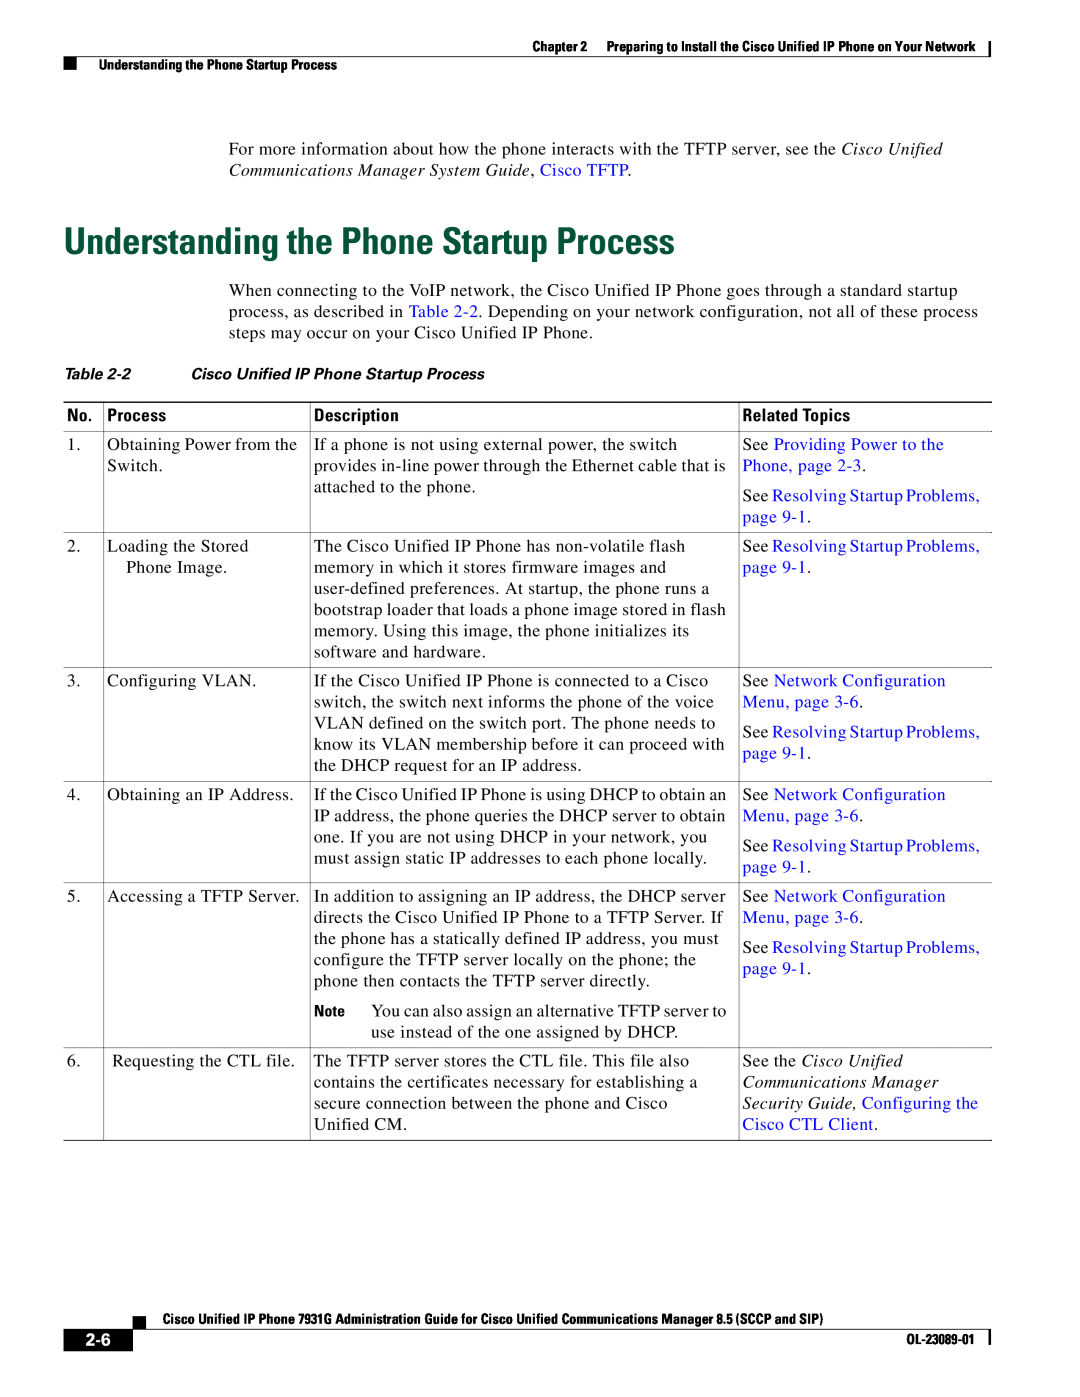 Cisco Systems OL-23089-01 Understanding the Phone Startup Process, Description, See Providing Power to the, Phone, page 